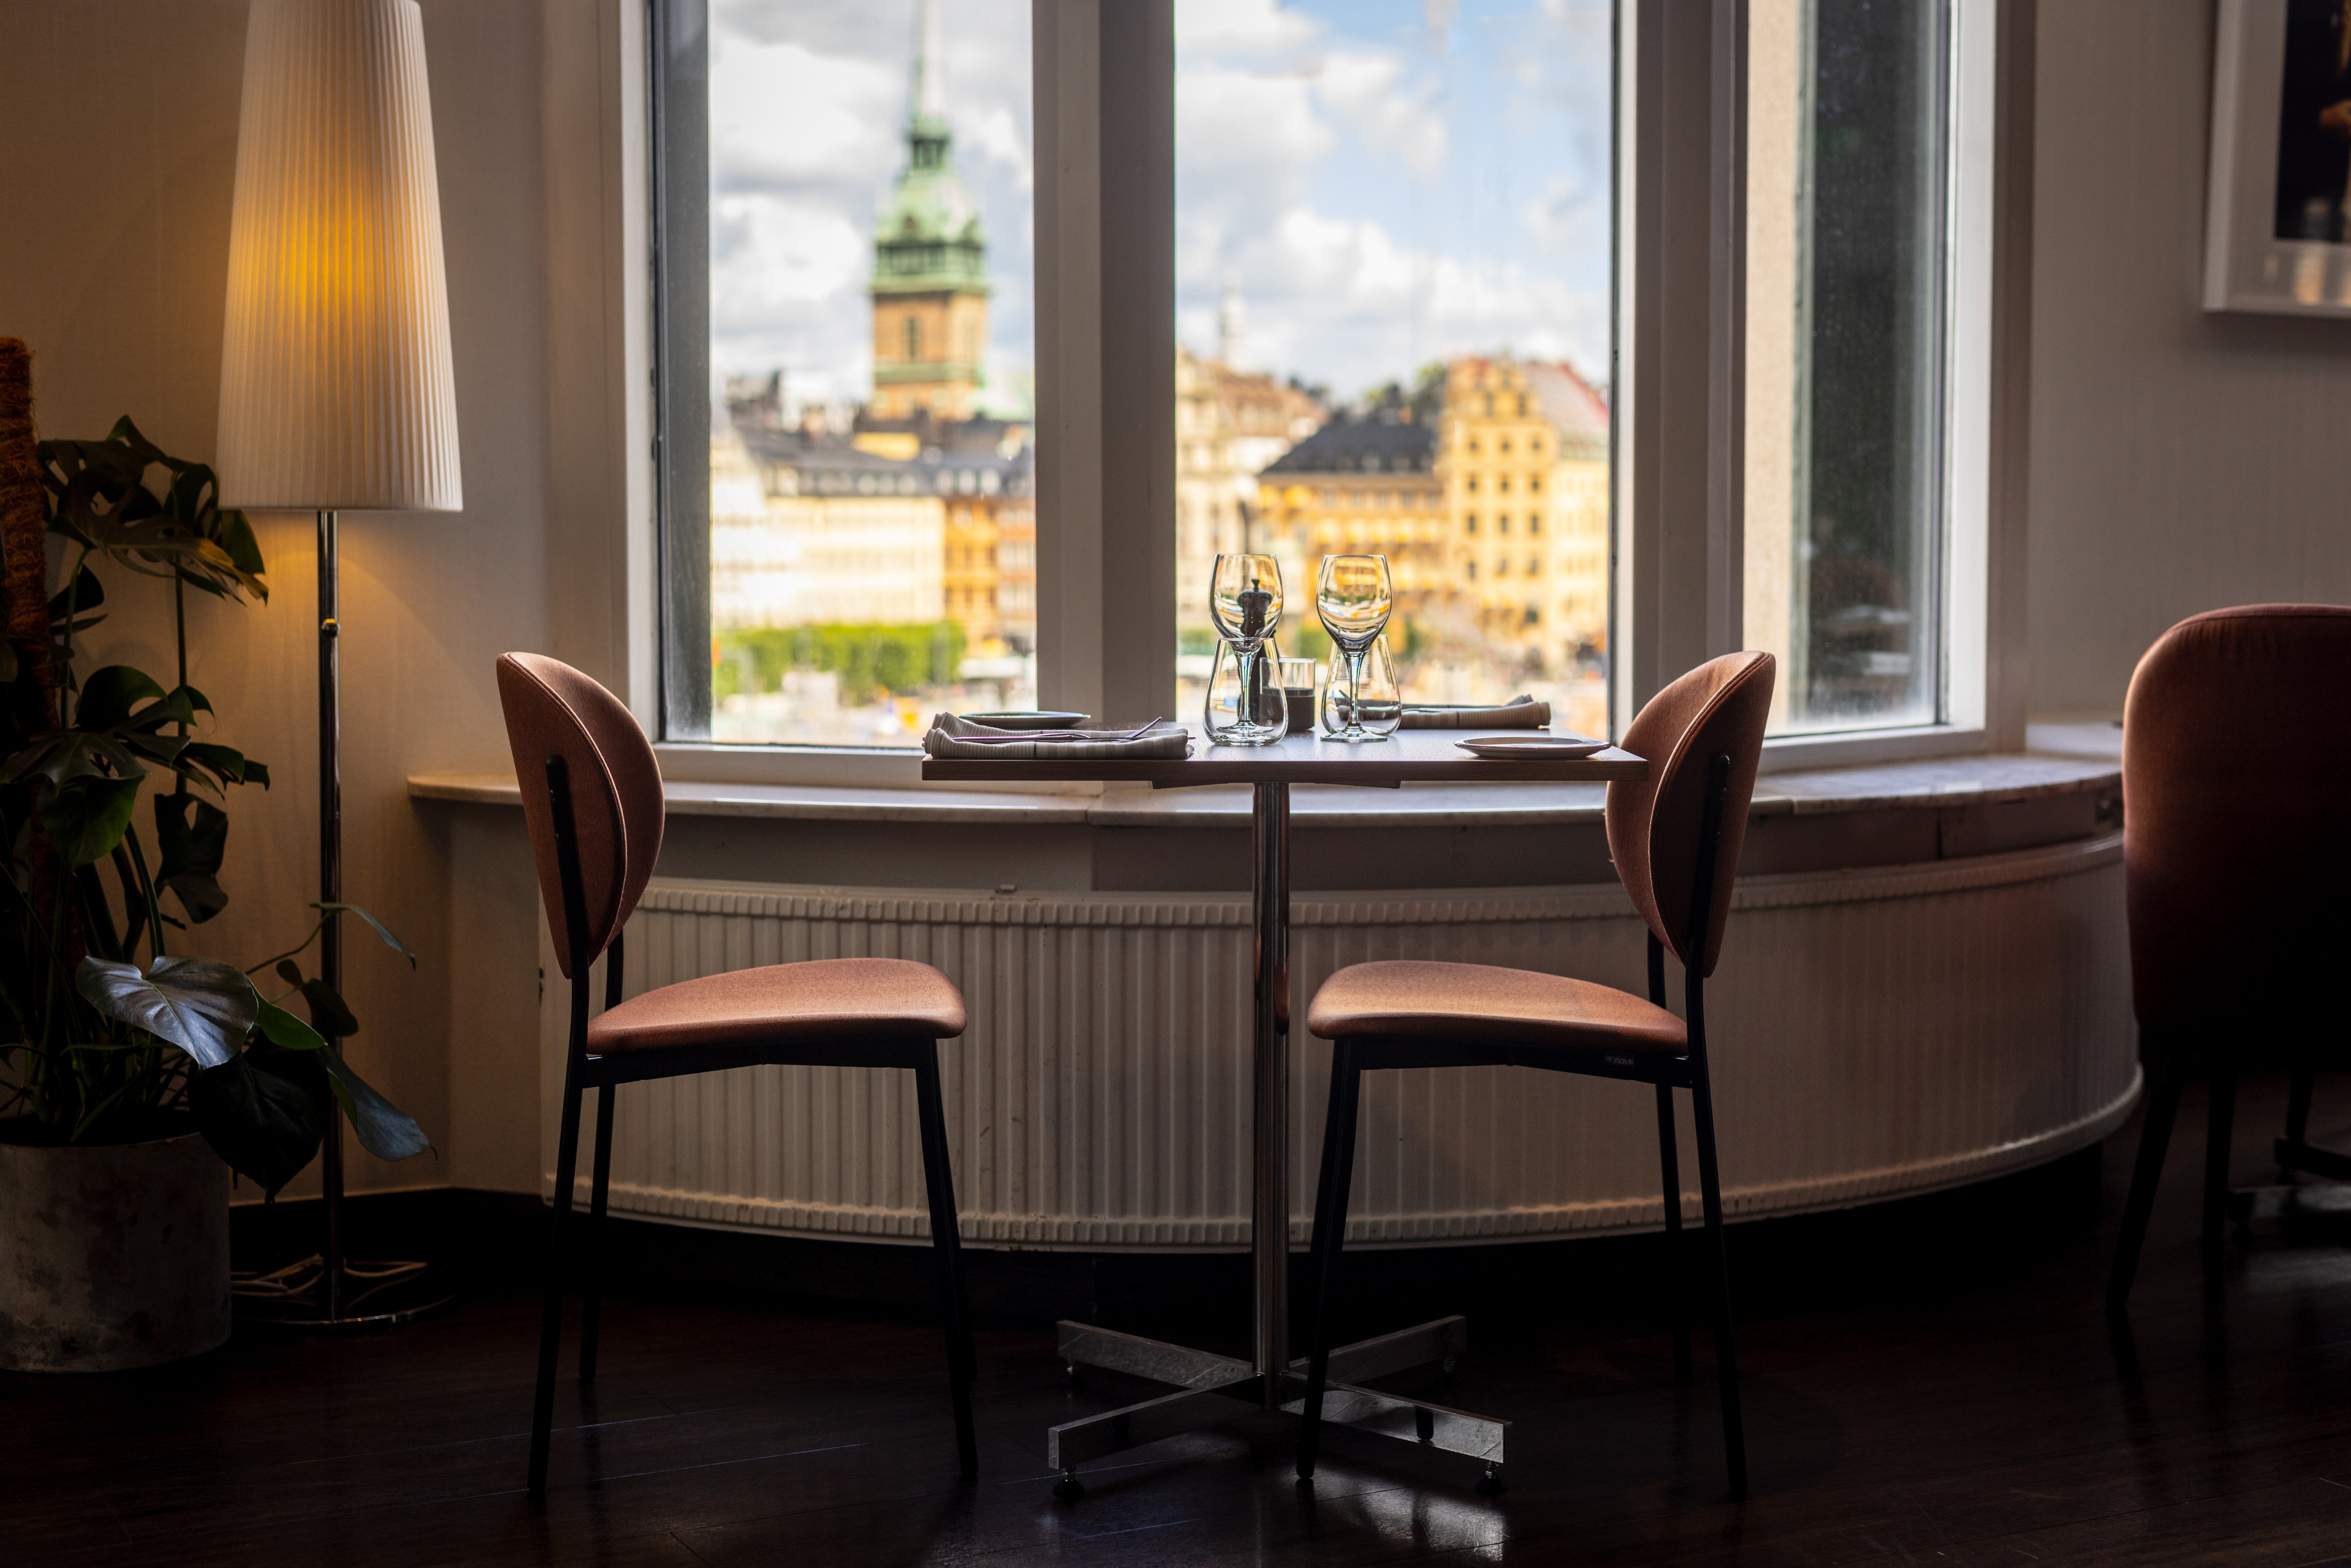 Table Set for Dining at a Restaurant with City View